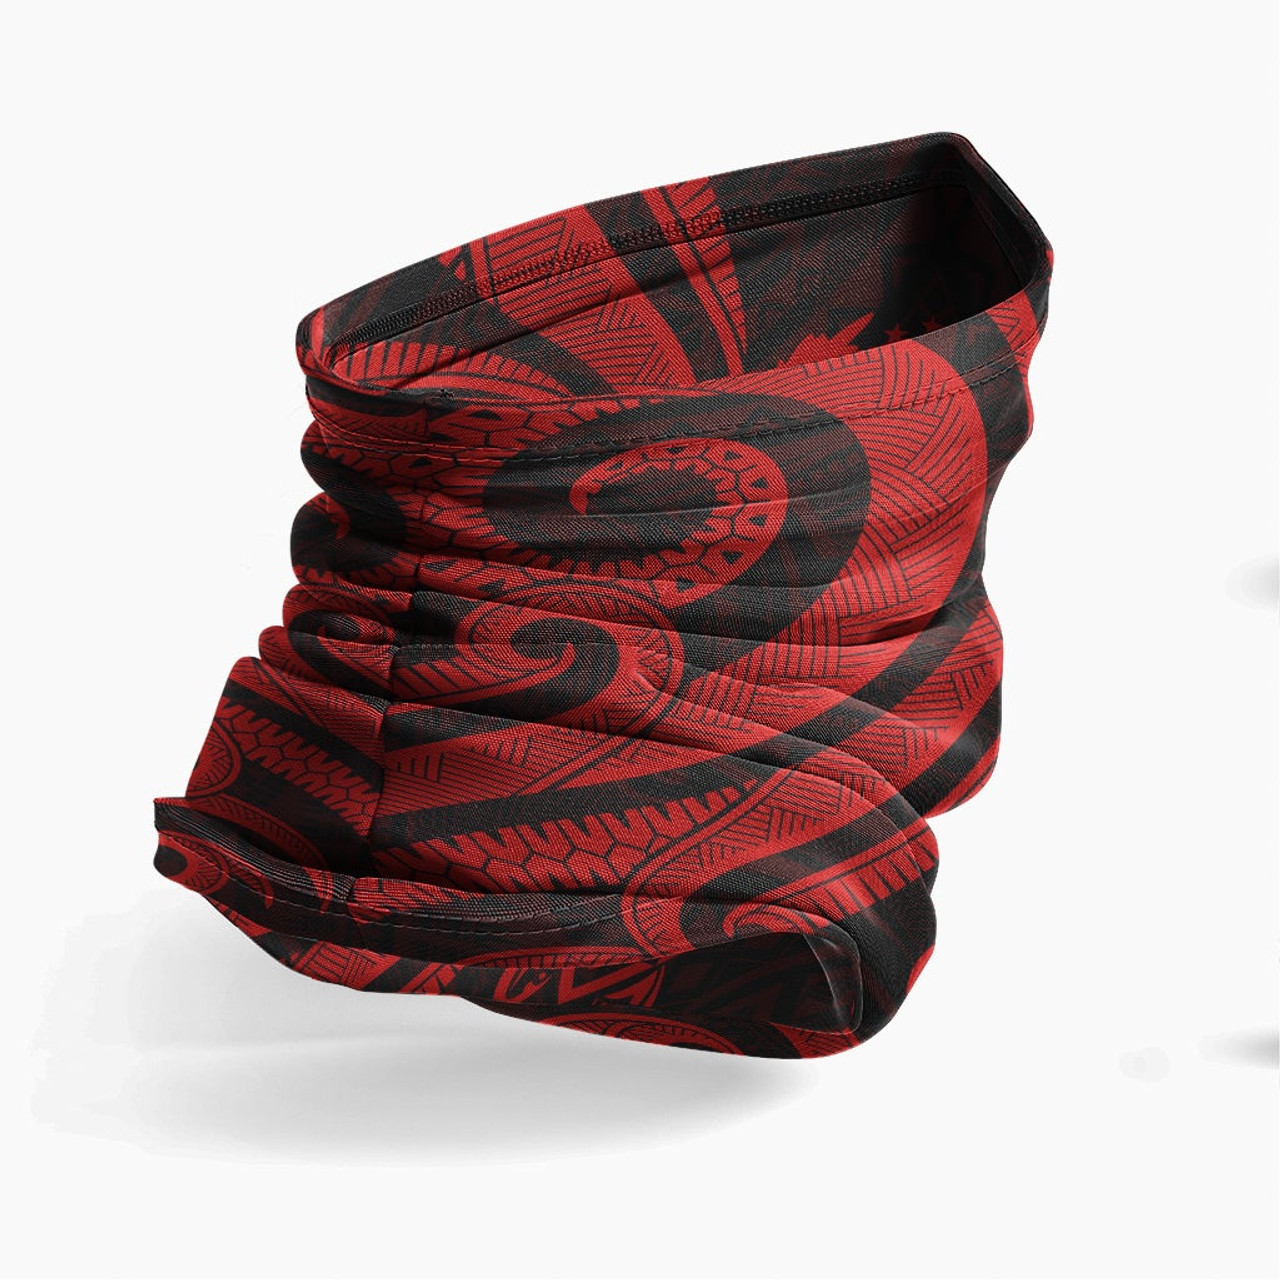 Pohnpei Neck Gaiter - Turtle Tentacle Red 3